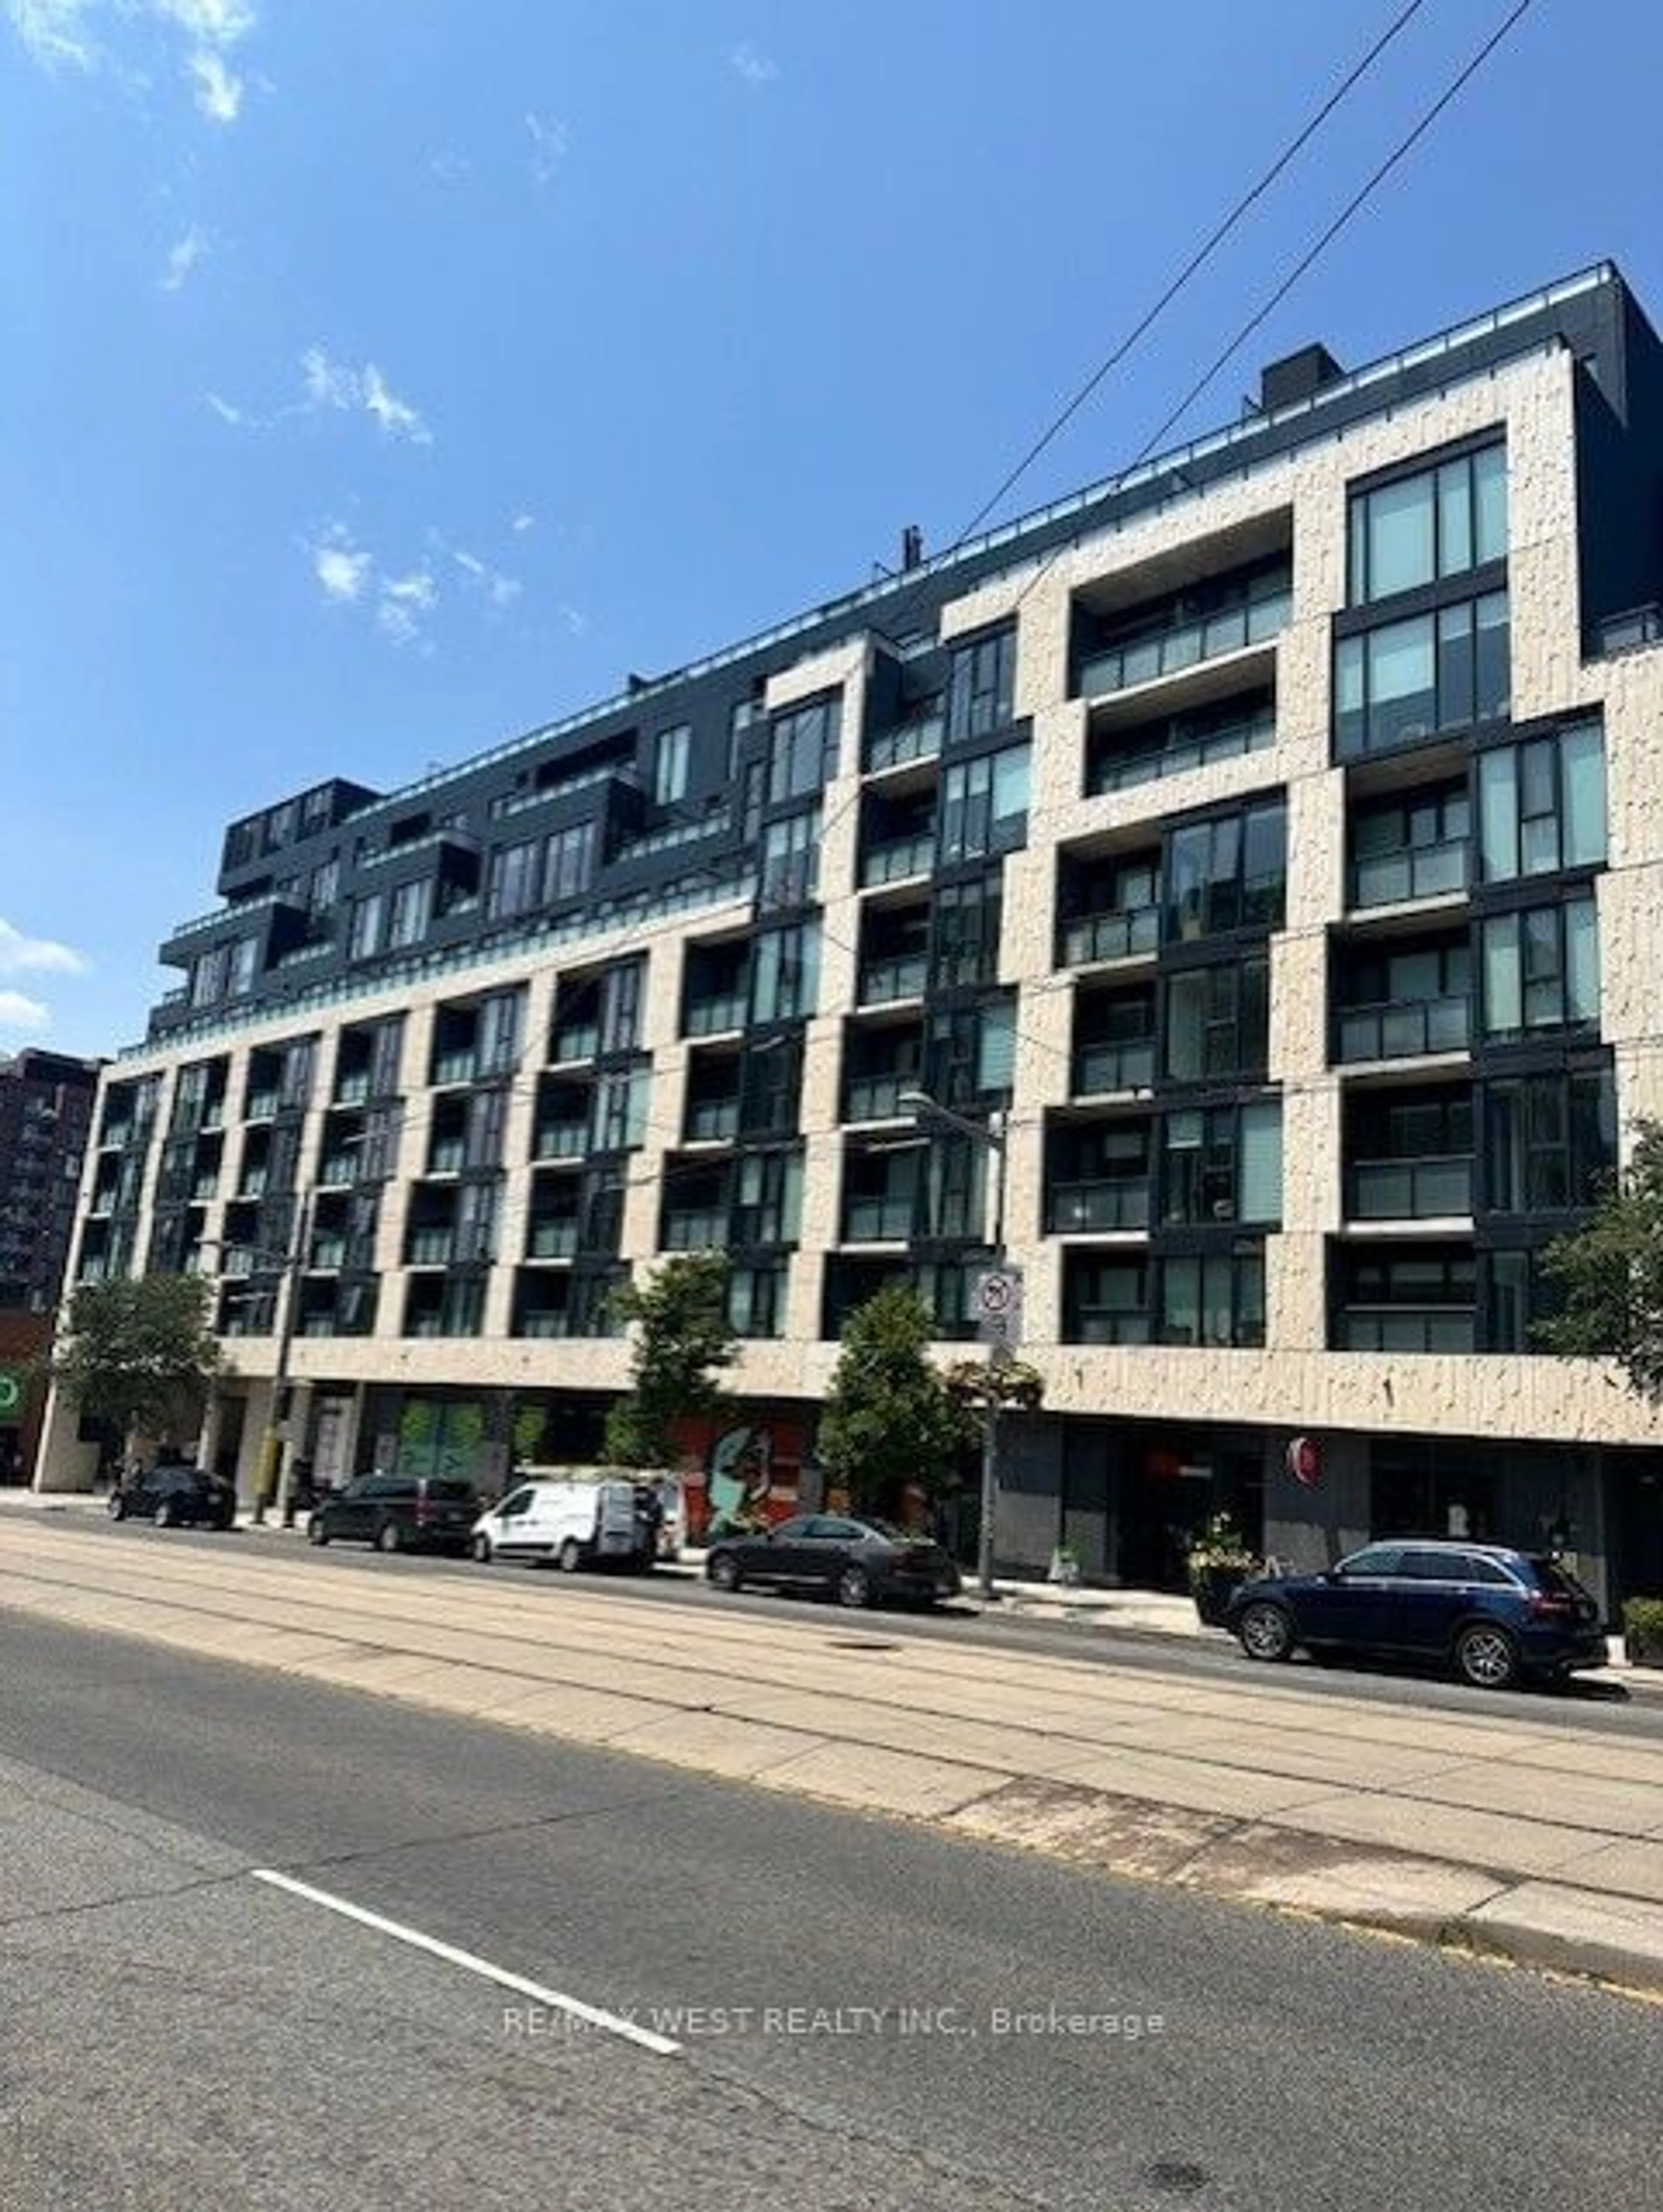 A pic from exterior of the house or condo for 840 St Clair Ave #317, Toronto Ontario M6C 1C1